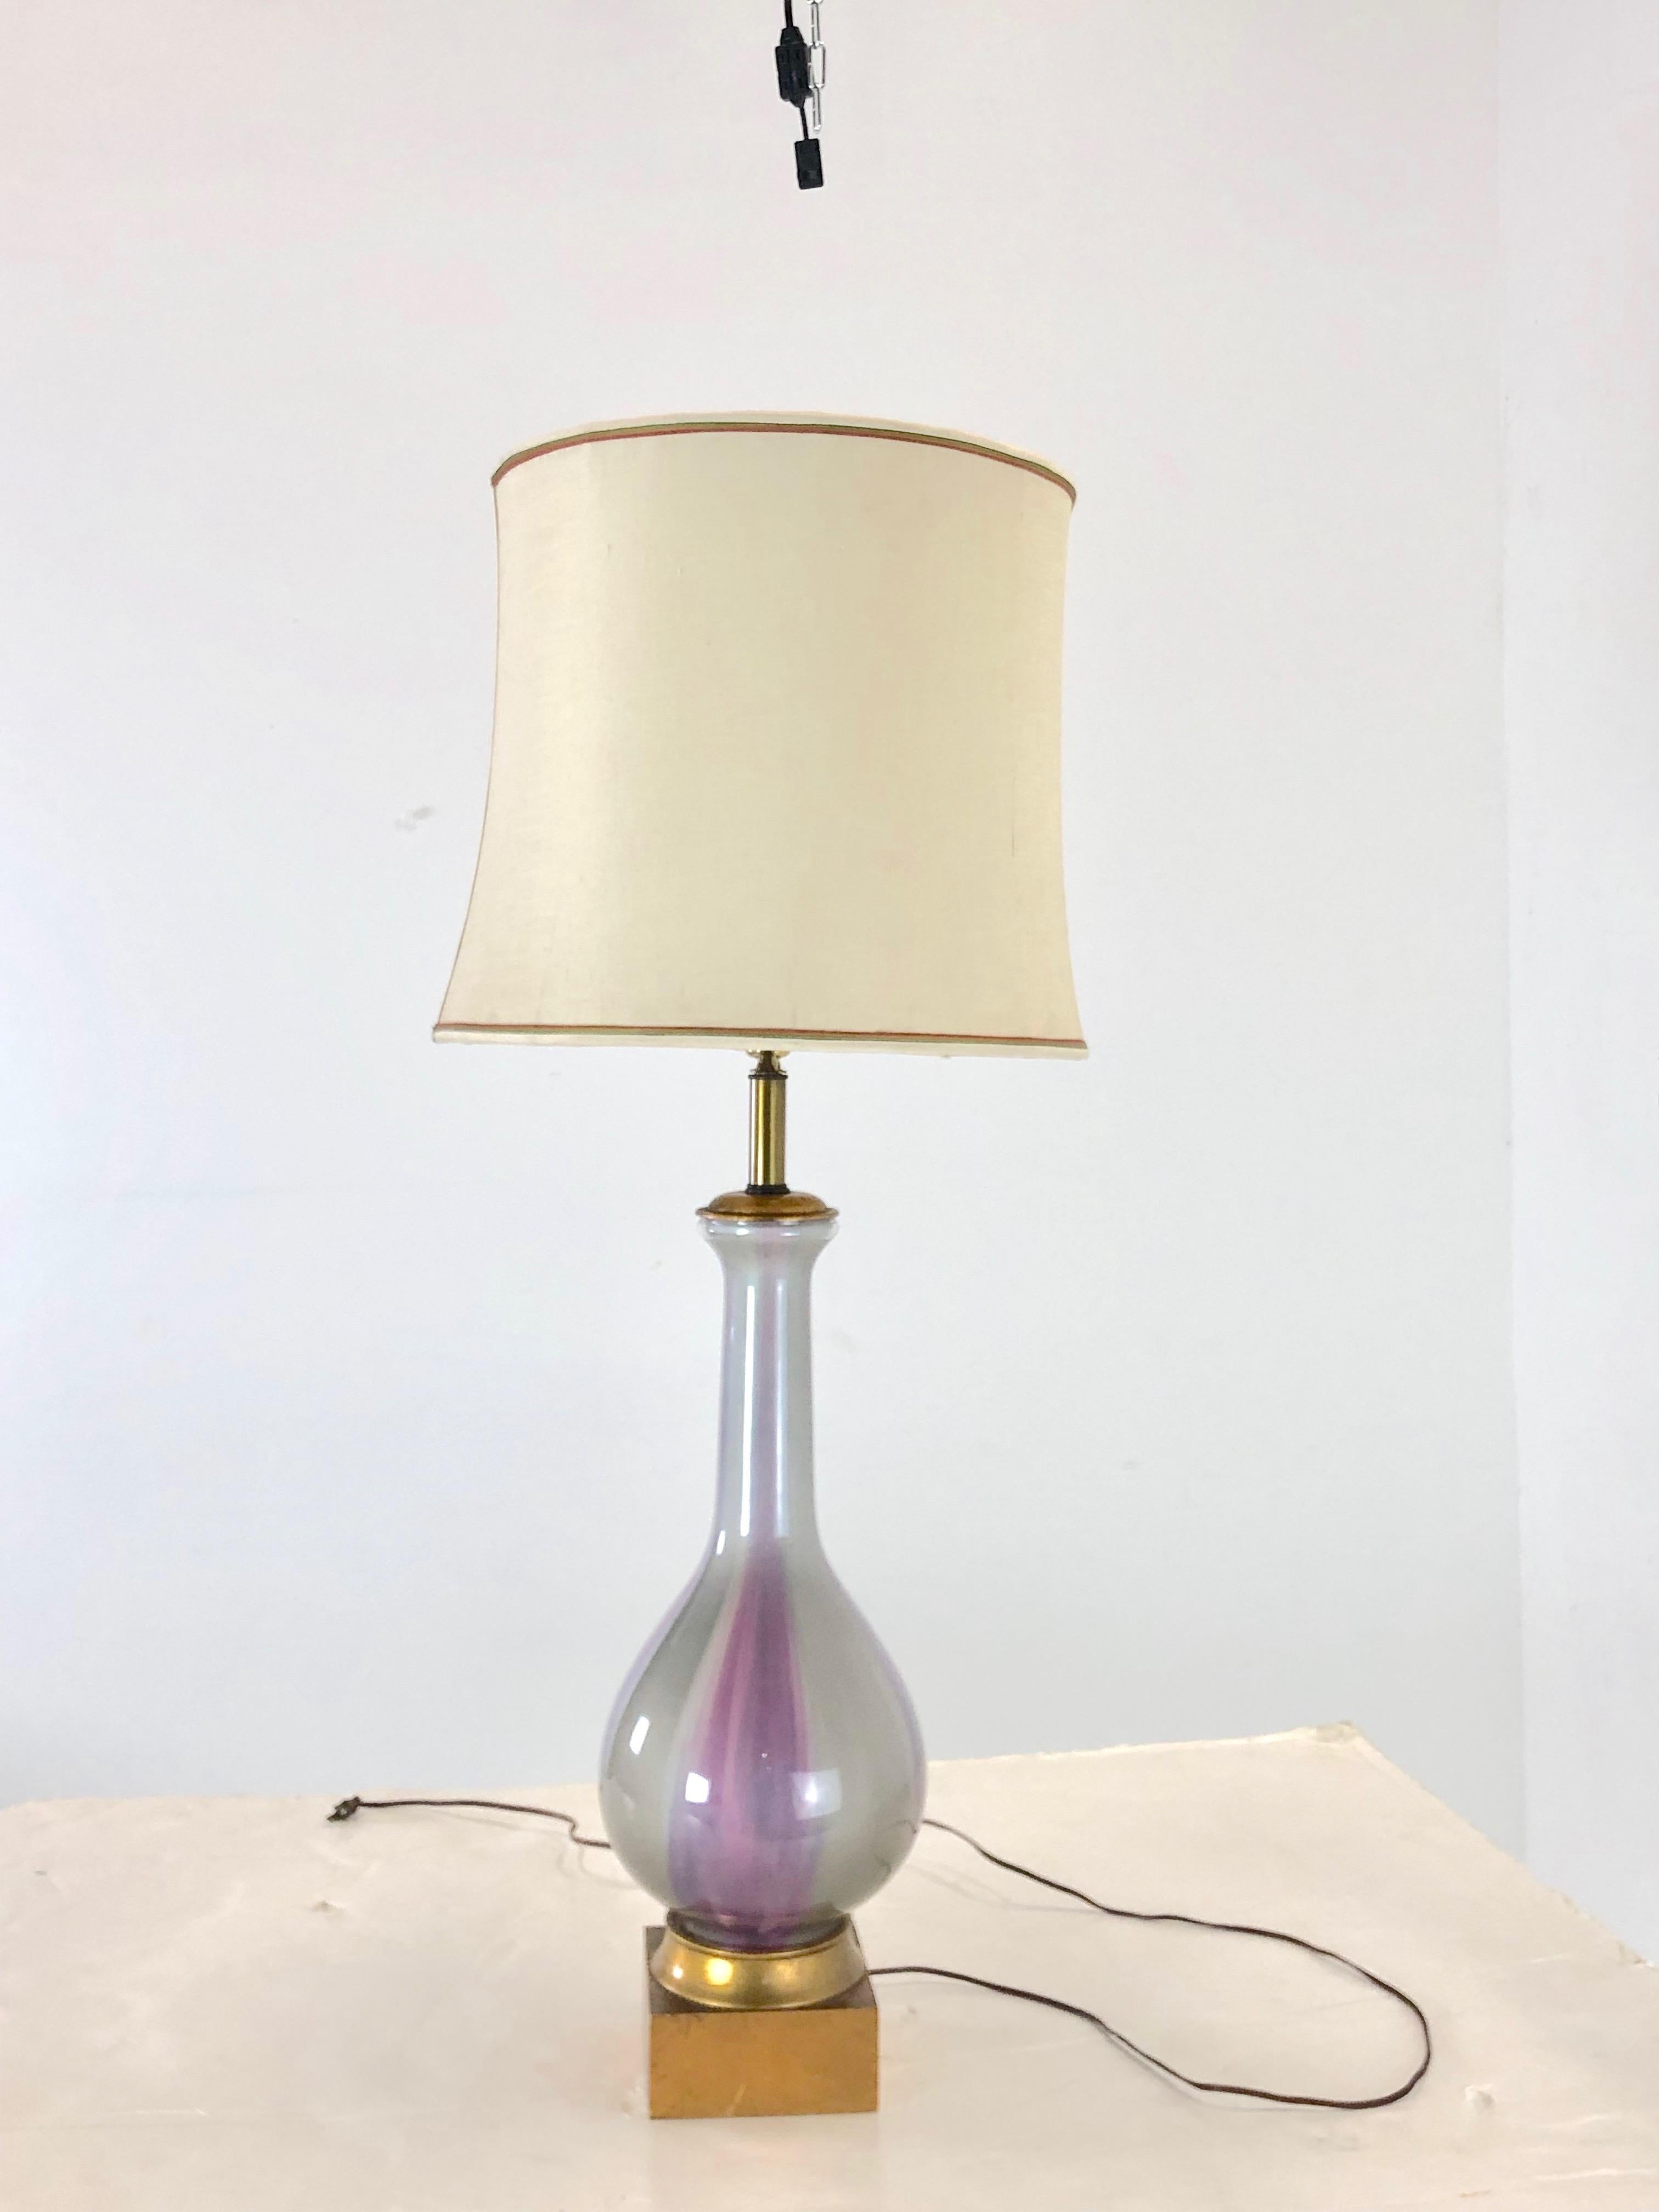 Iridescent lamp by Frederick Cooper. Lamp is in good vintage condition with original wiring, circa 1960s.

Lamp shade not included.

Dimensions:
9 W × 9 D × 30 T (top of socket) 44 T (top of harp).